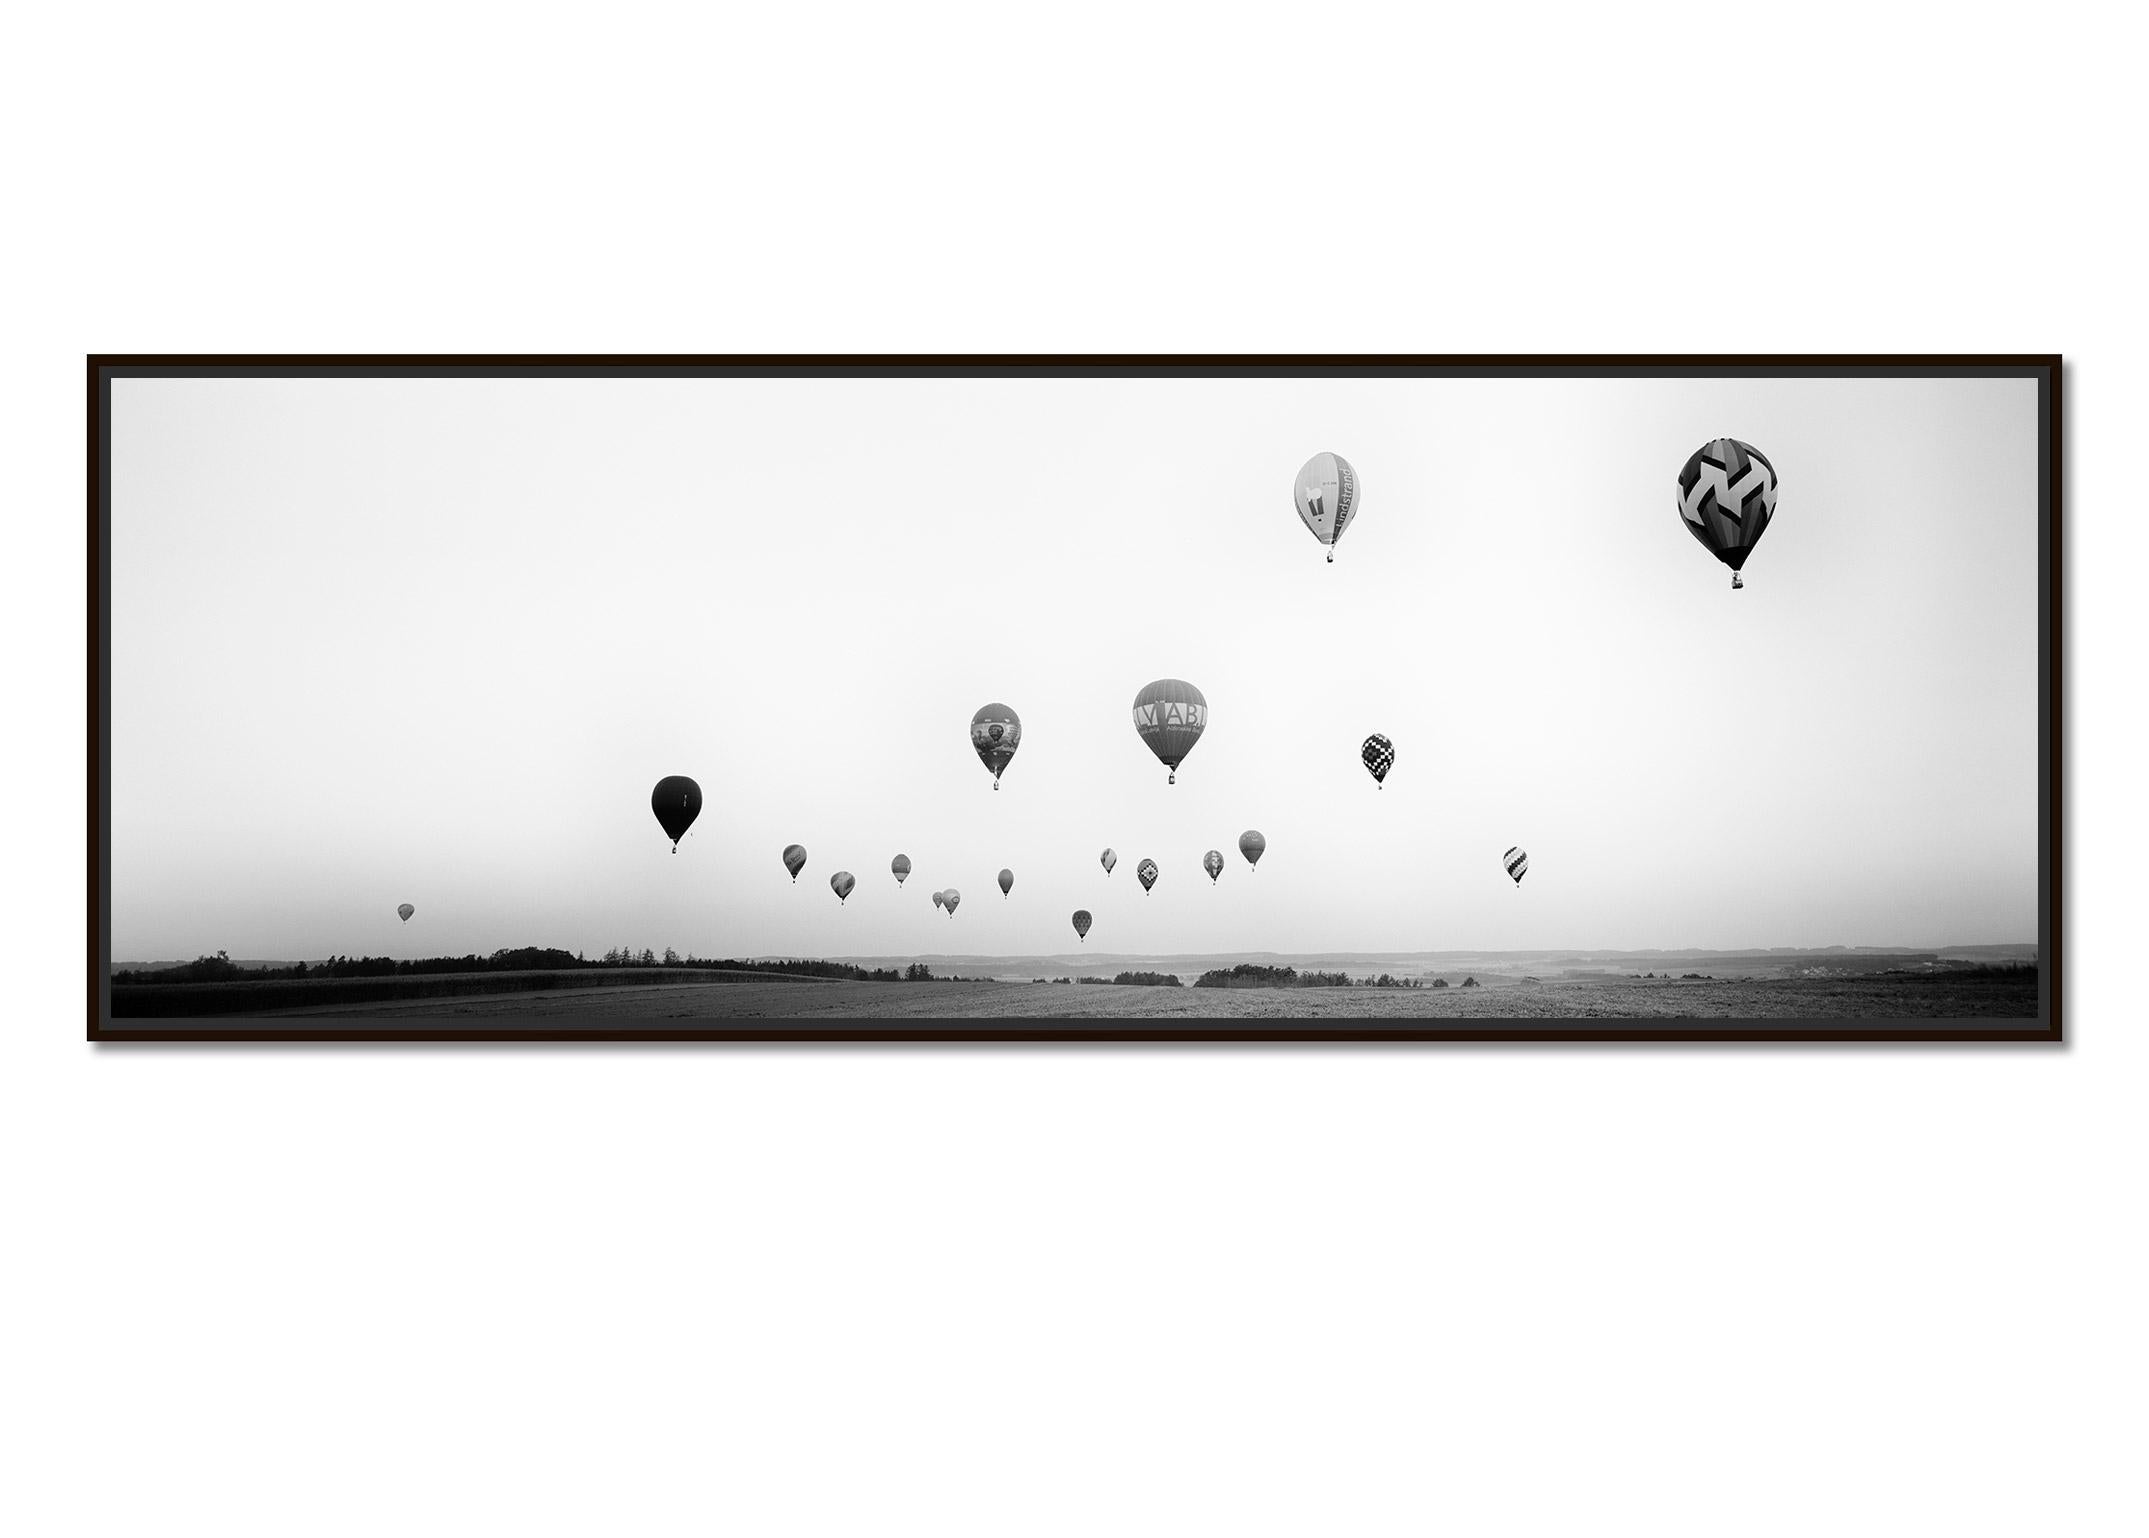 Hot Air Balloon Panorama, World Championship, black white landscape photography - Photograph by Gerald Berghammer